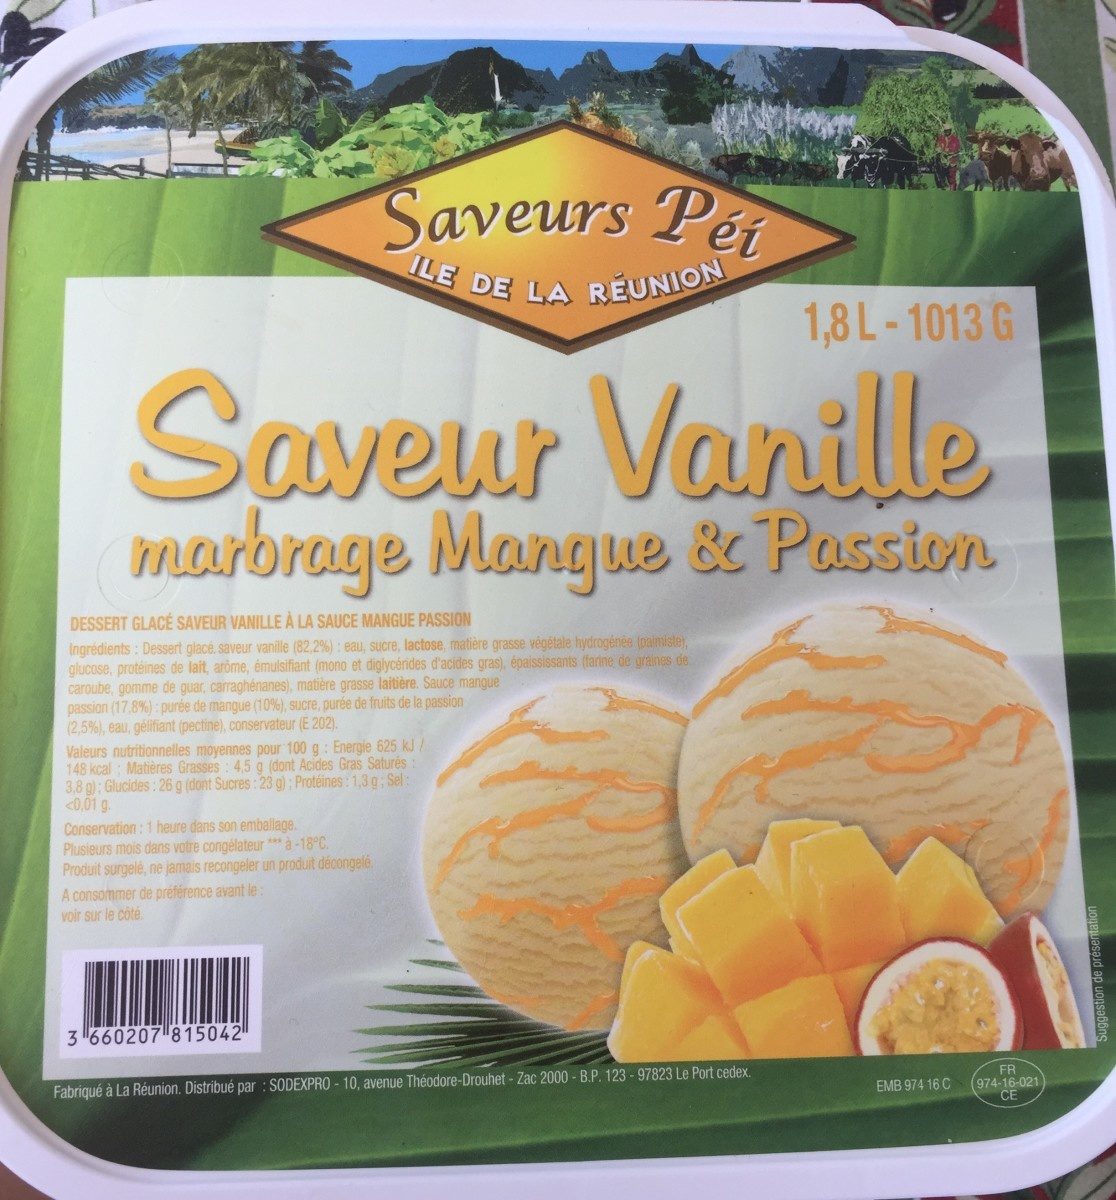 Saveur vanille - Product - fr